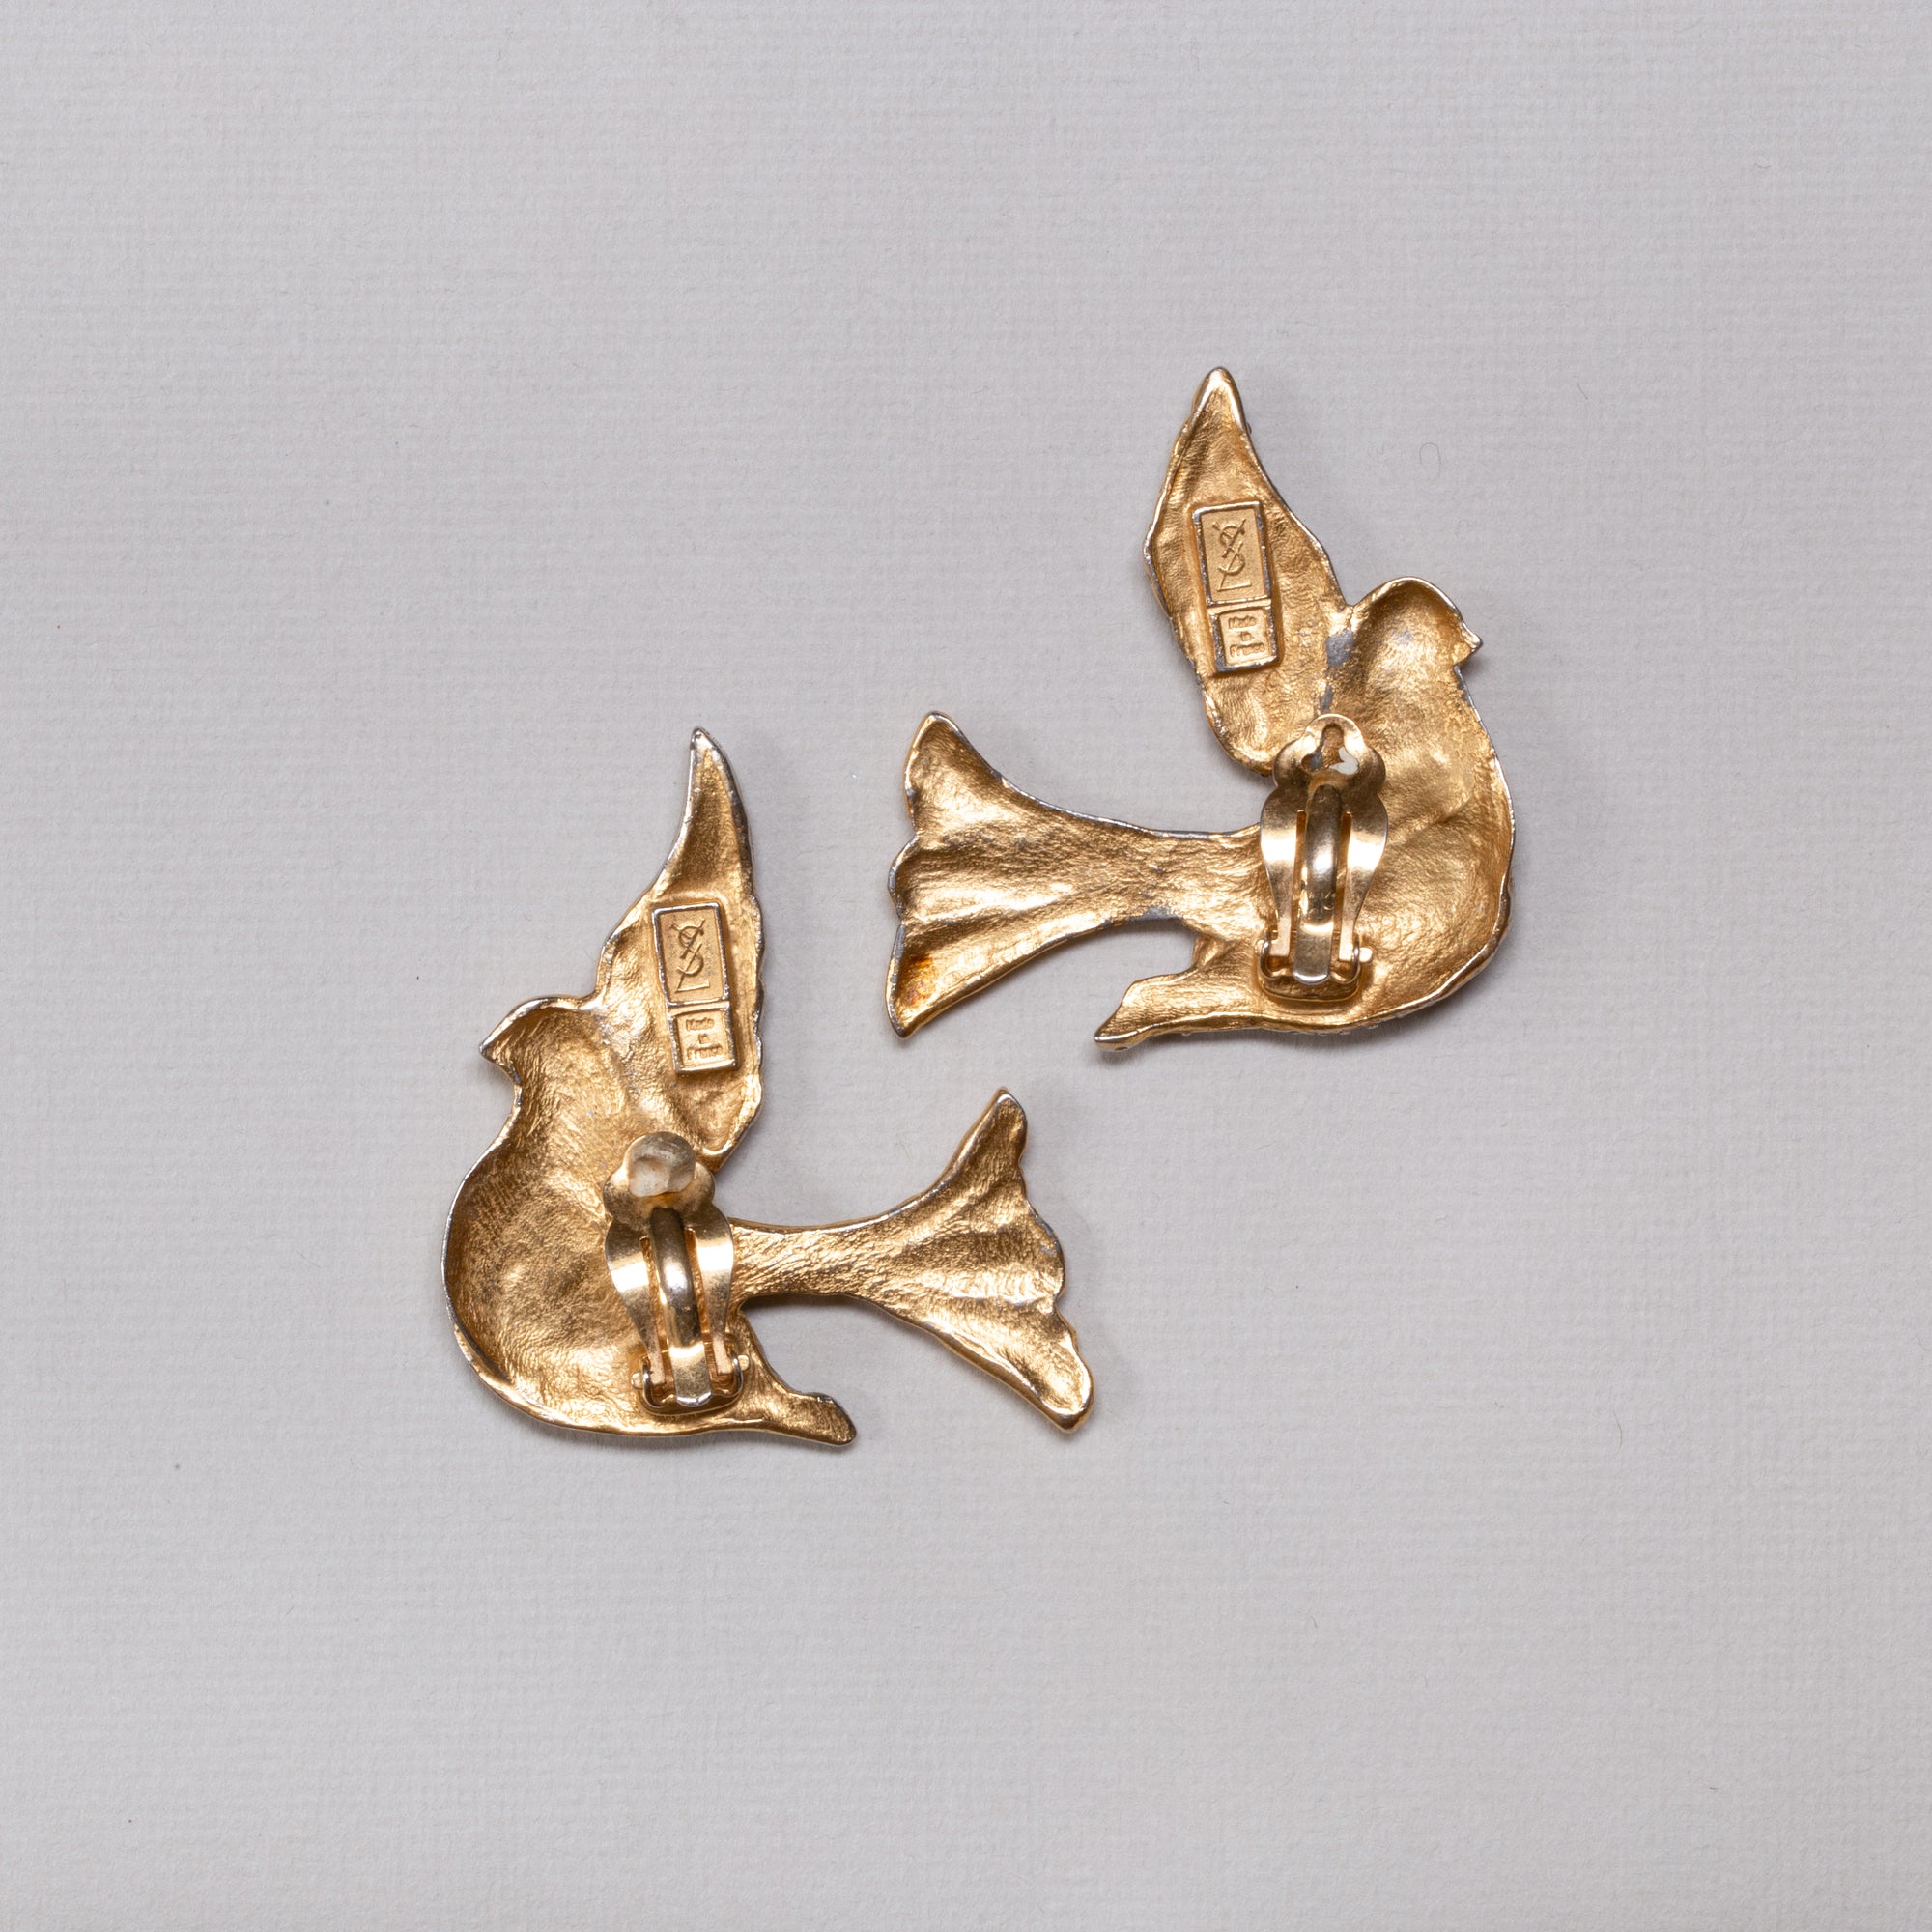 Vintage Pair of Gold Birds Brooches with Rhinestones